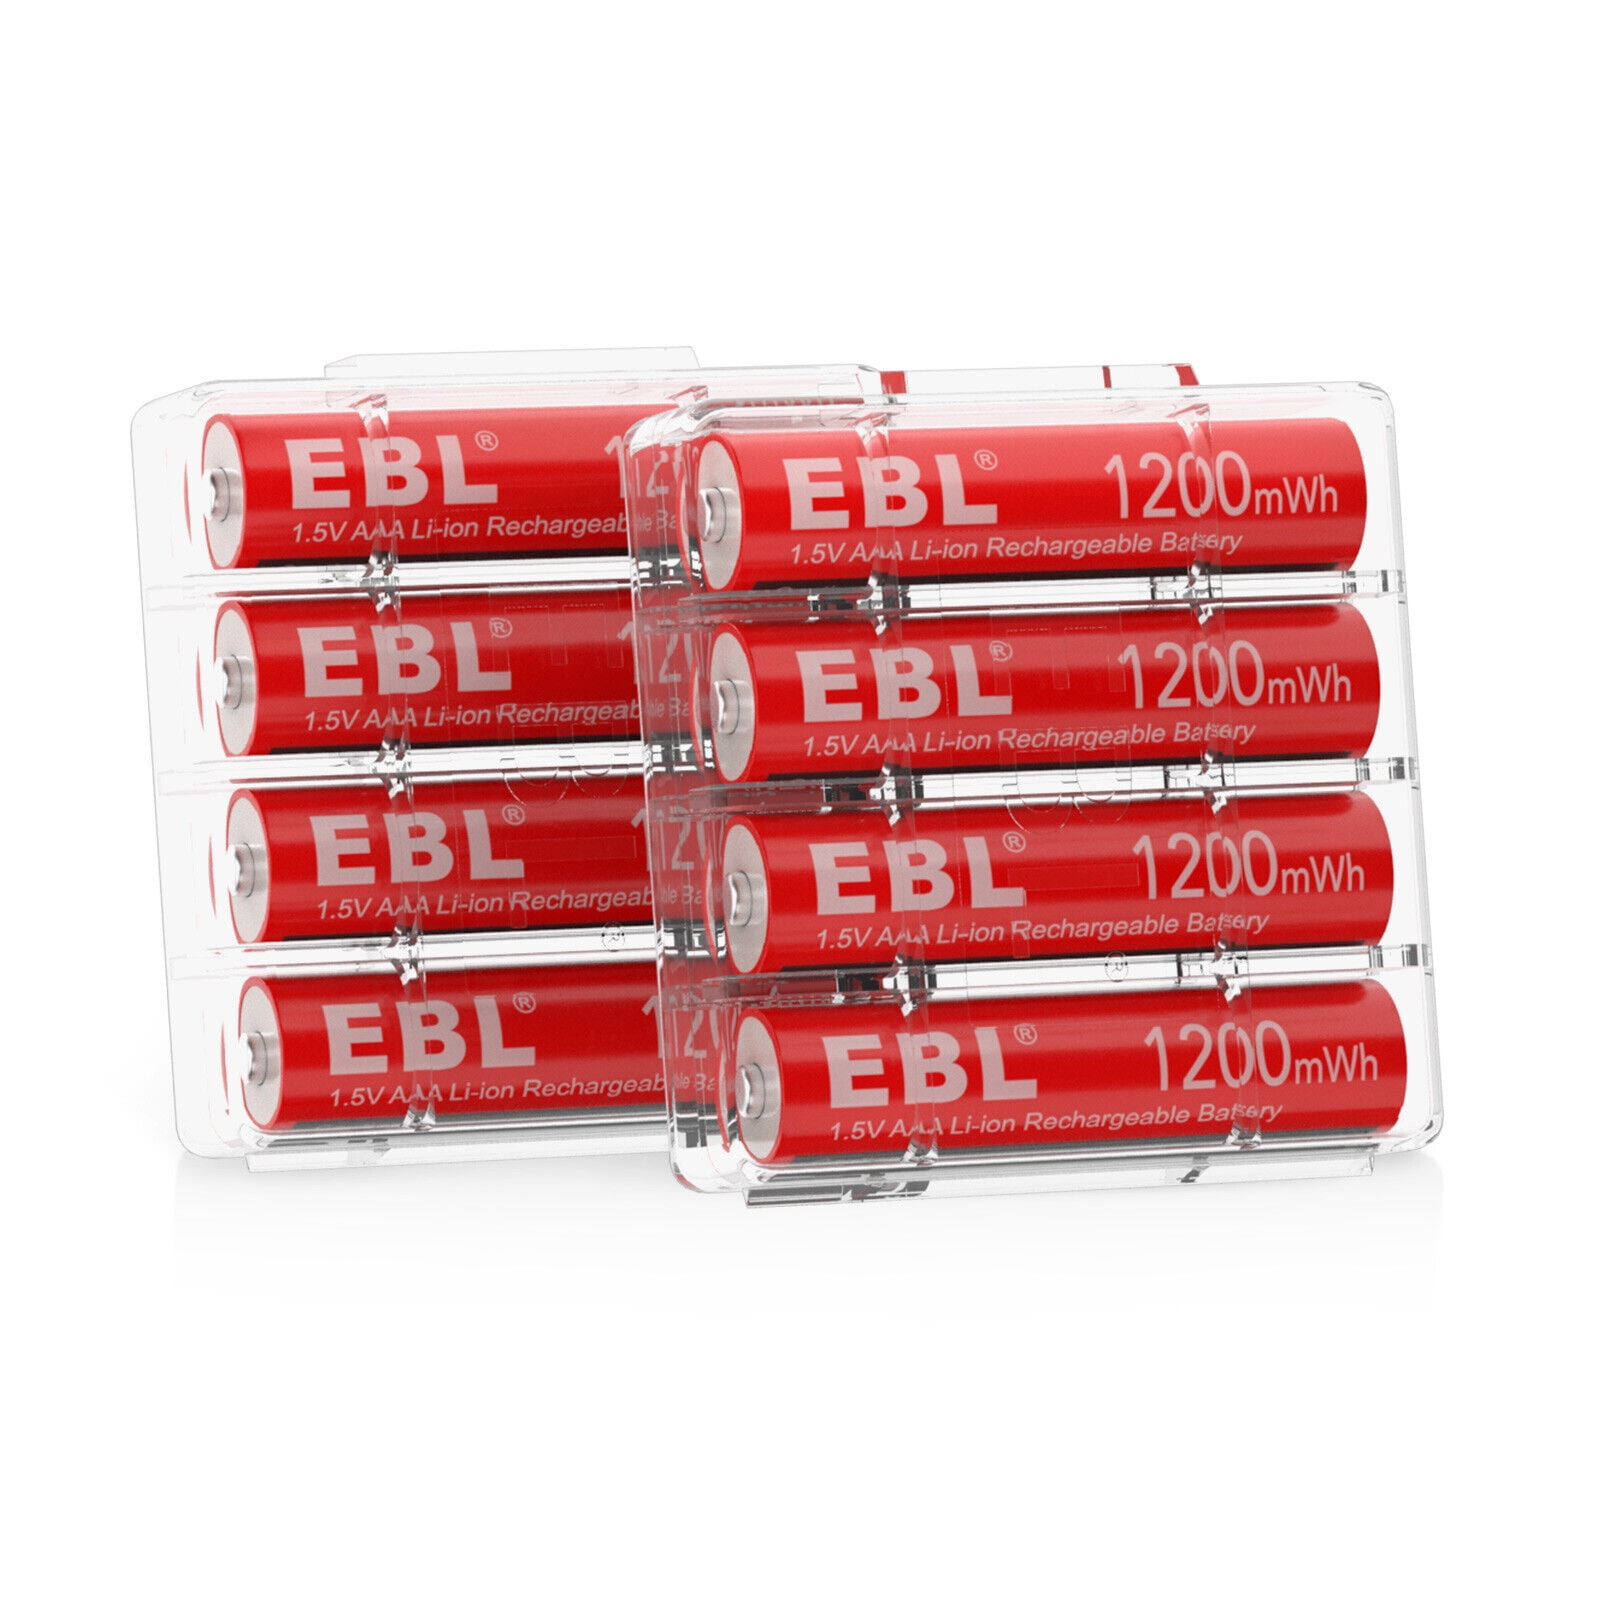 EBL Rechargeable AAA Batteries 1200mWh 1.5V Lithium-Ion Battery, 8-Pack 